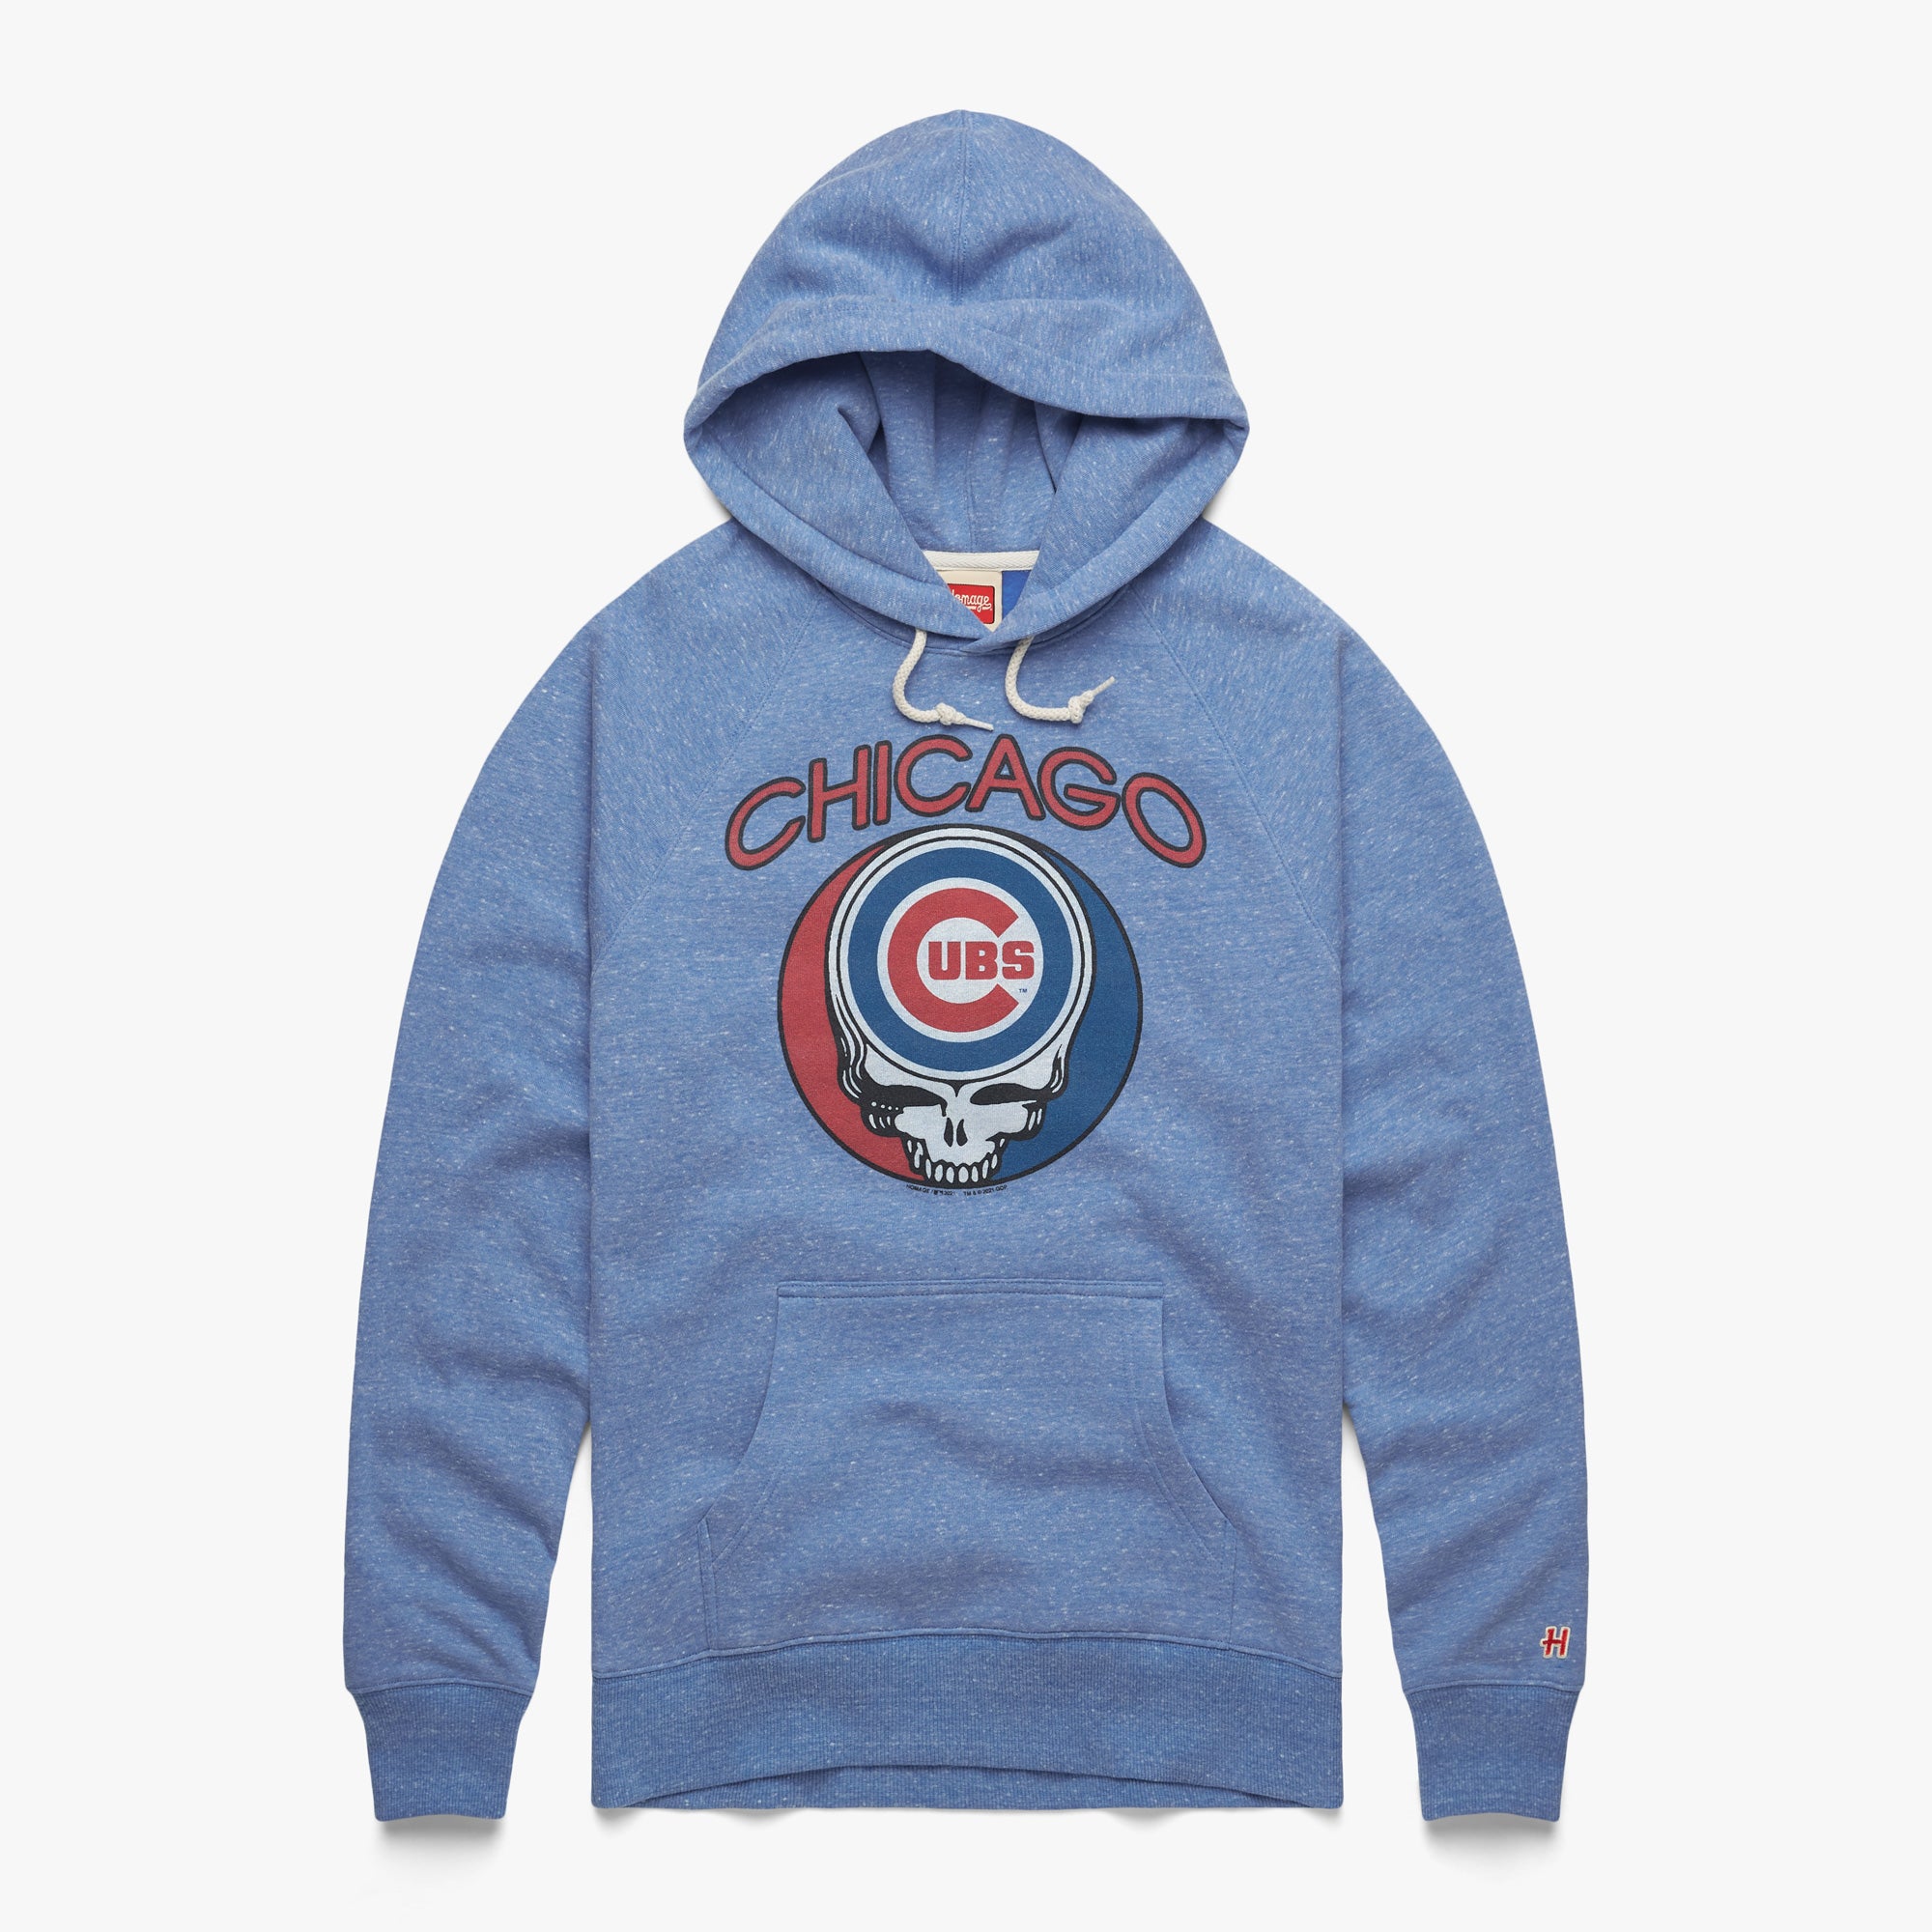 MLB x Grateful Dead x Cubs Hoodie from Homage. | Light Blue | Vintage Apparel from Homage.